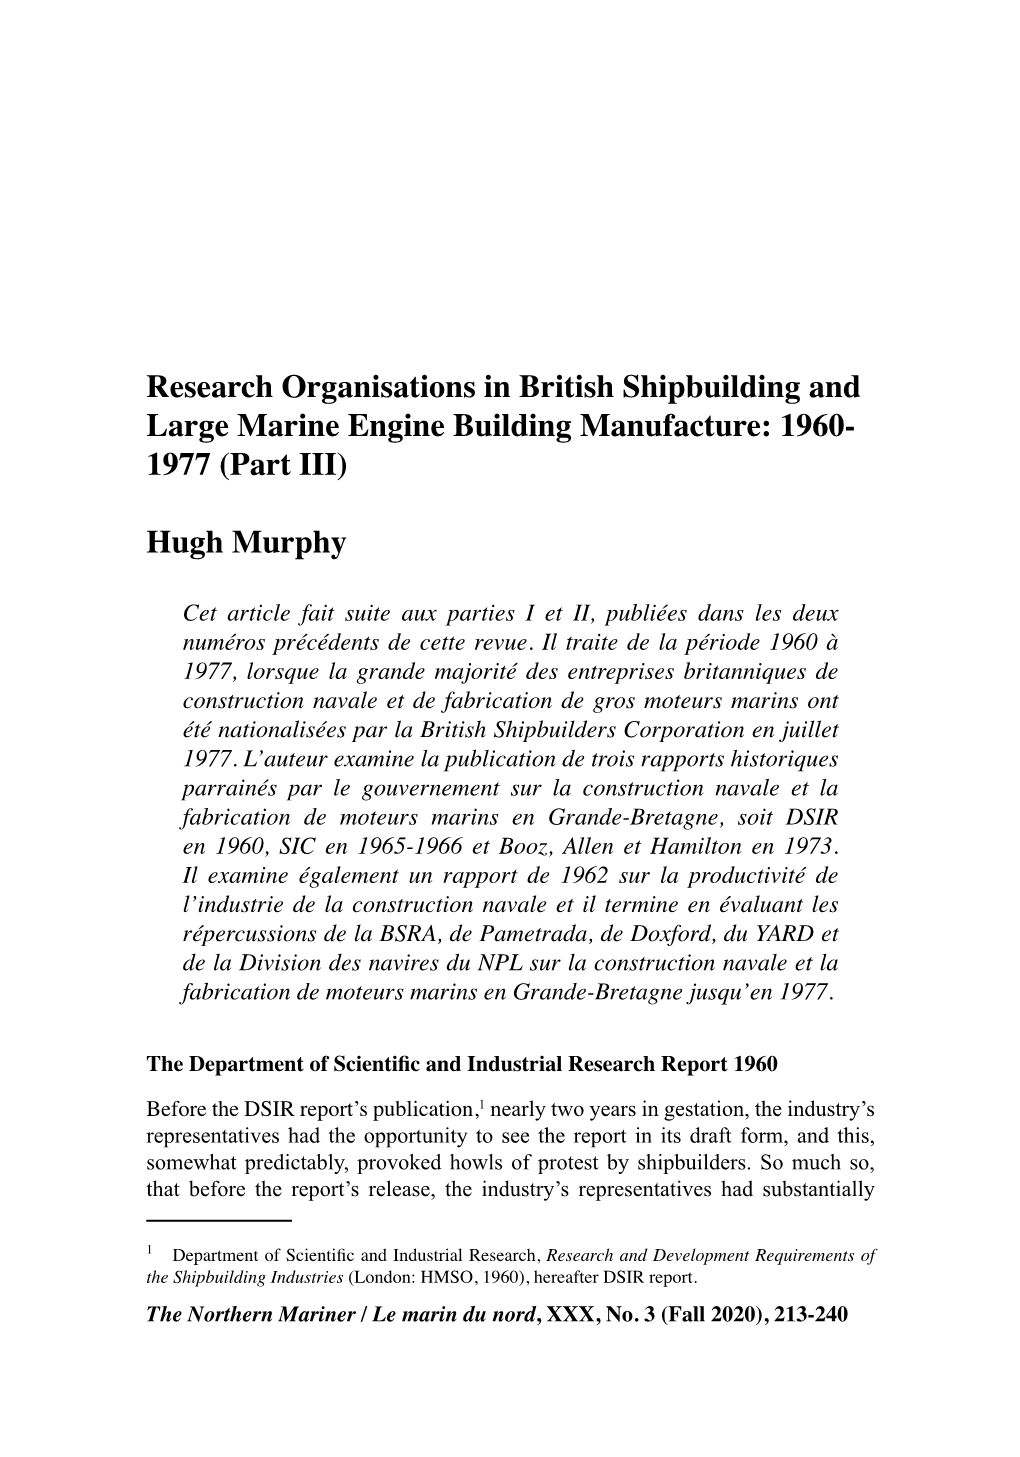 Research Organisations in British Shipbuilding and Large Marine Engine Building Manufacture: 1960- 1977 (Part III)